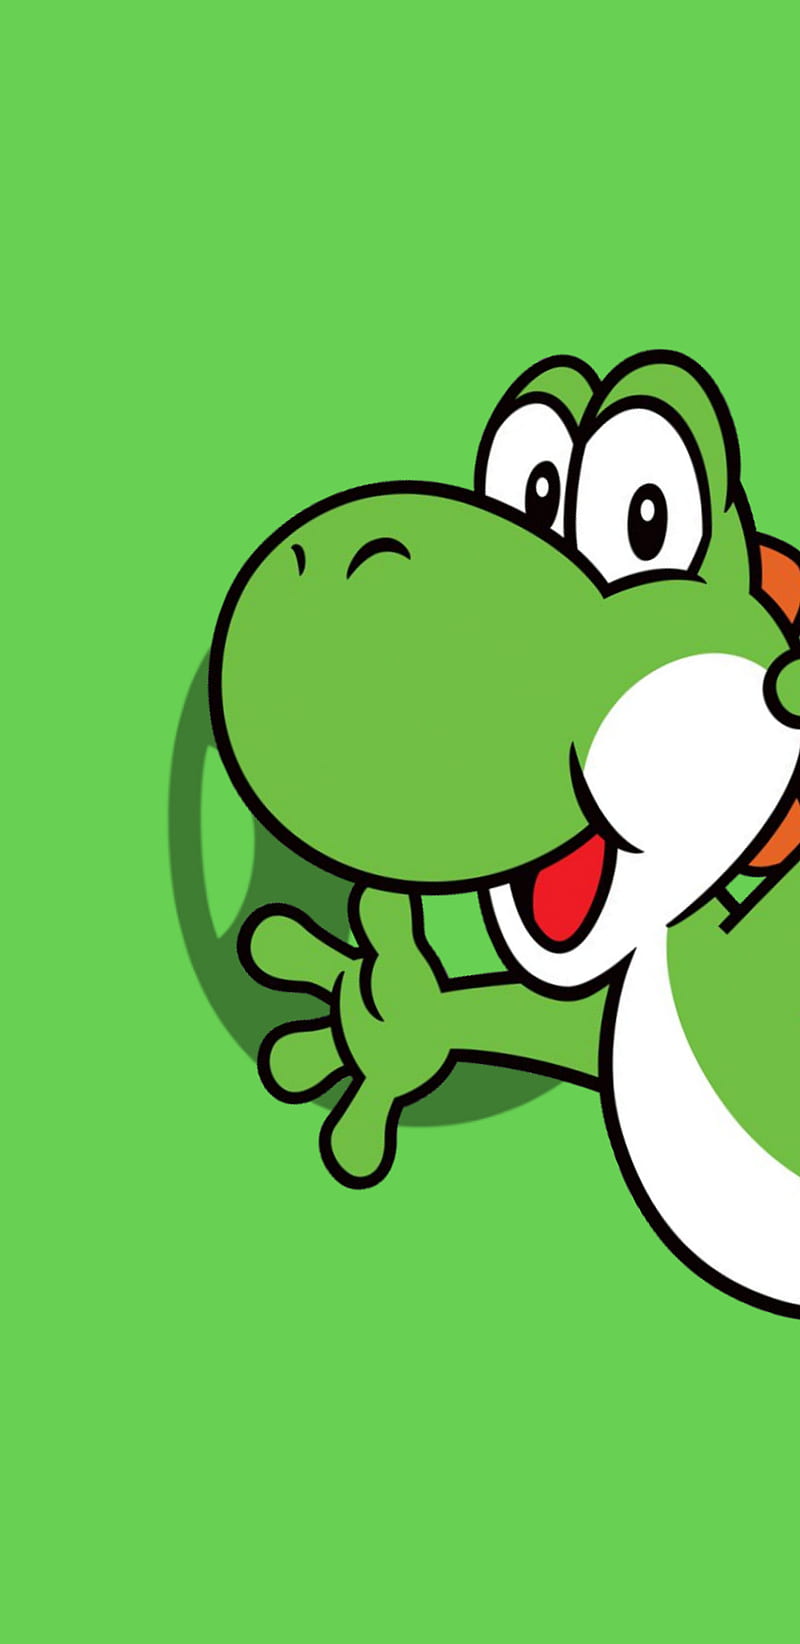 Yoshi wallpaper by SoZoNe85  Download on ZEDGE  4a1d